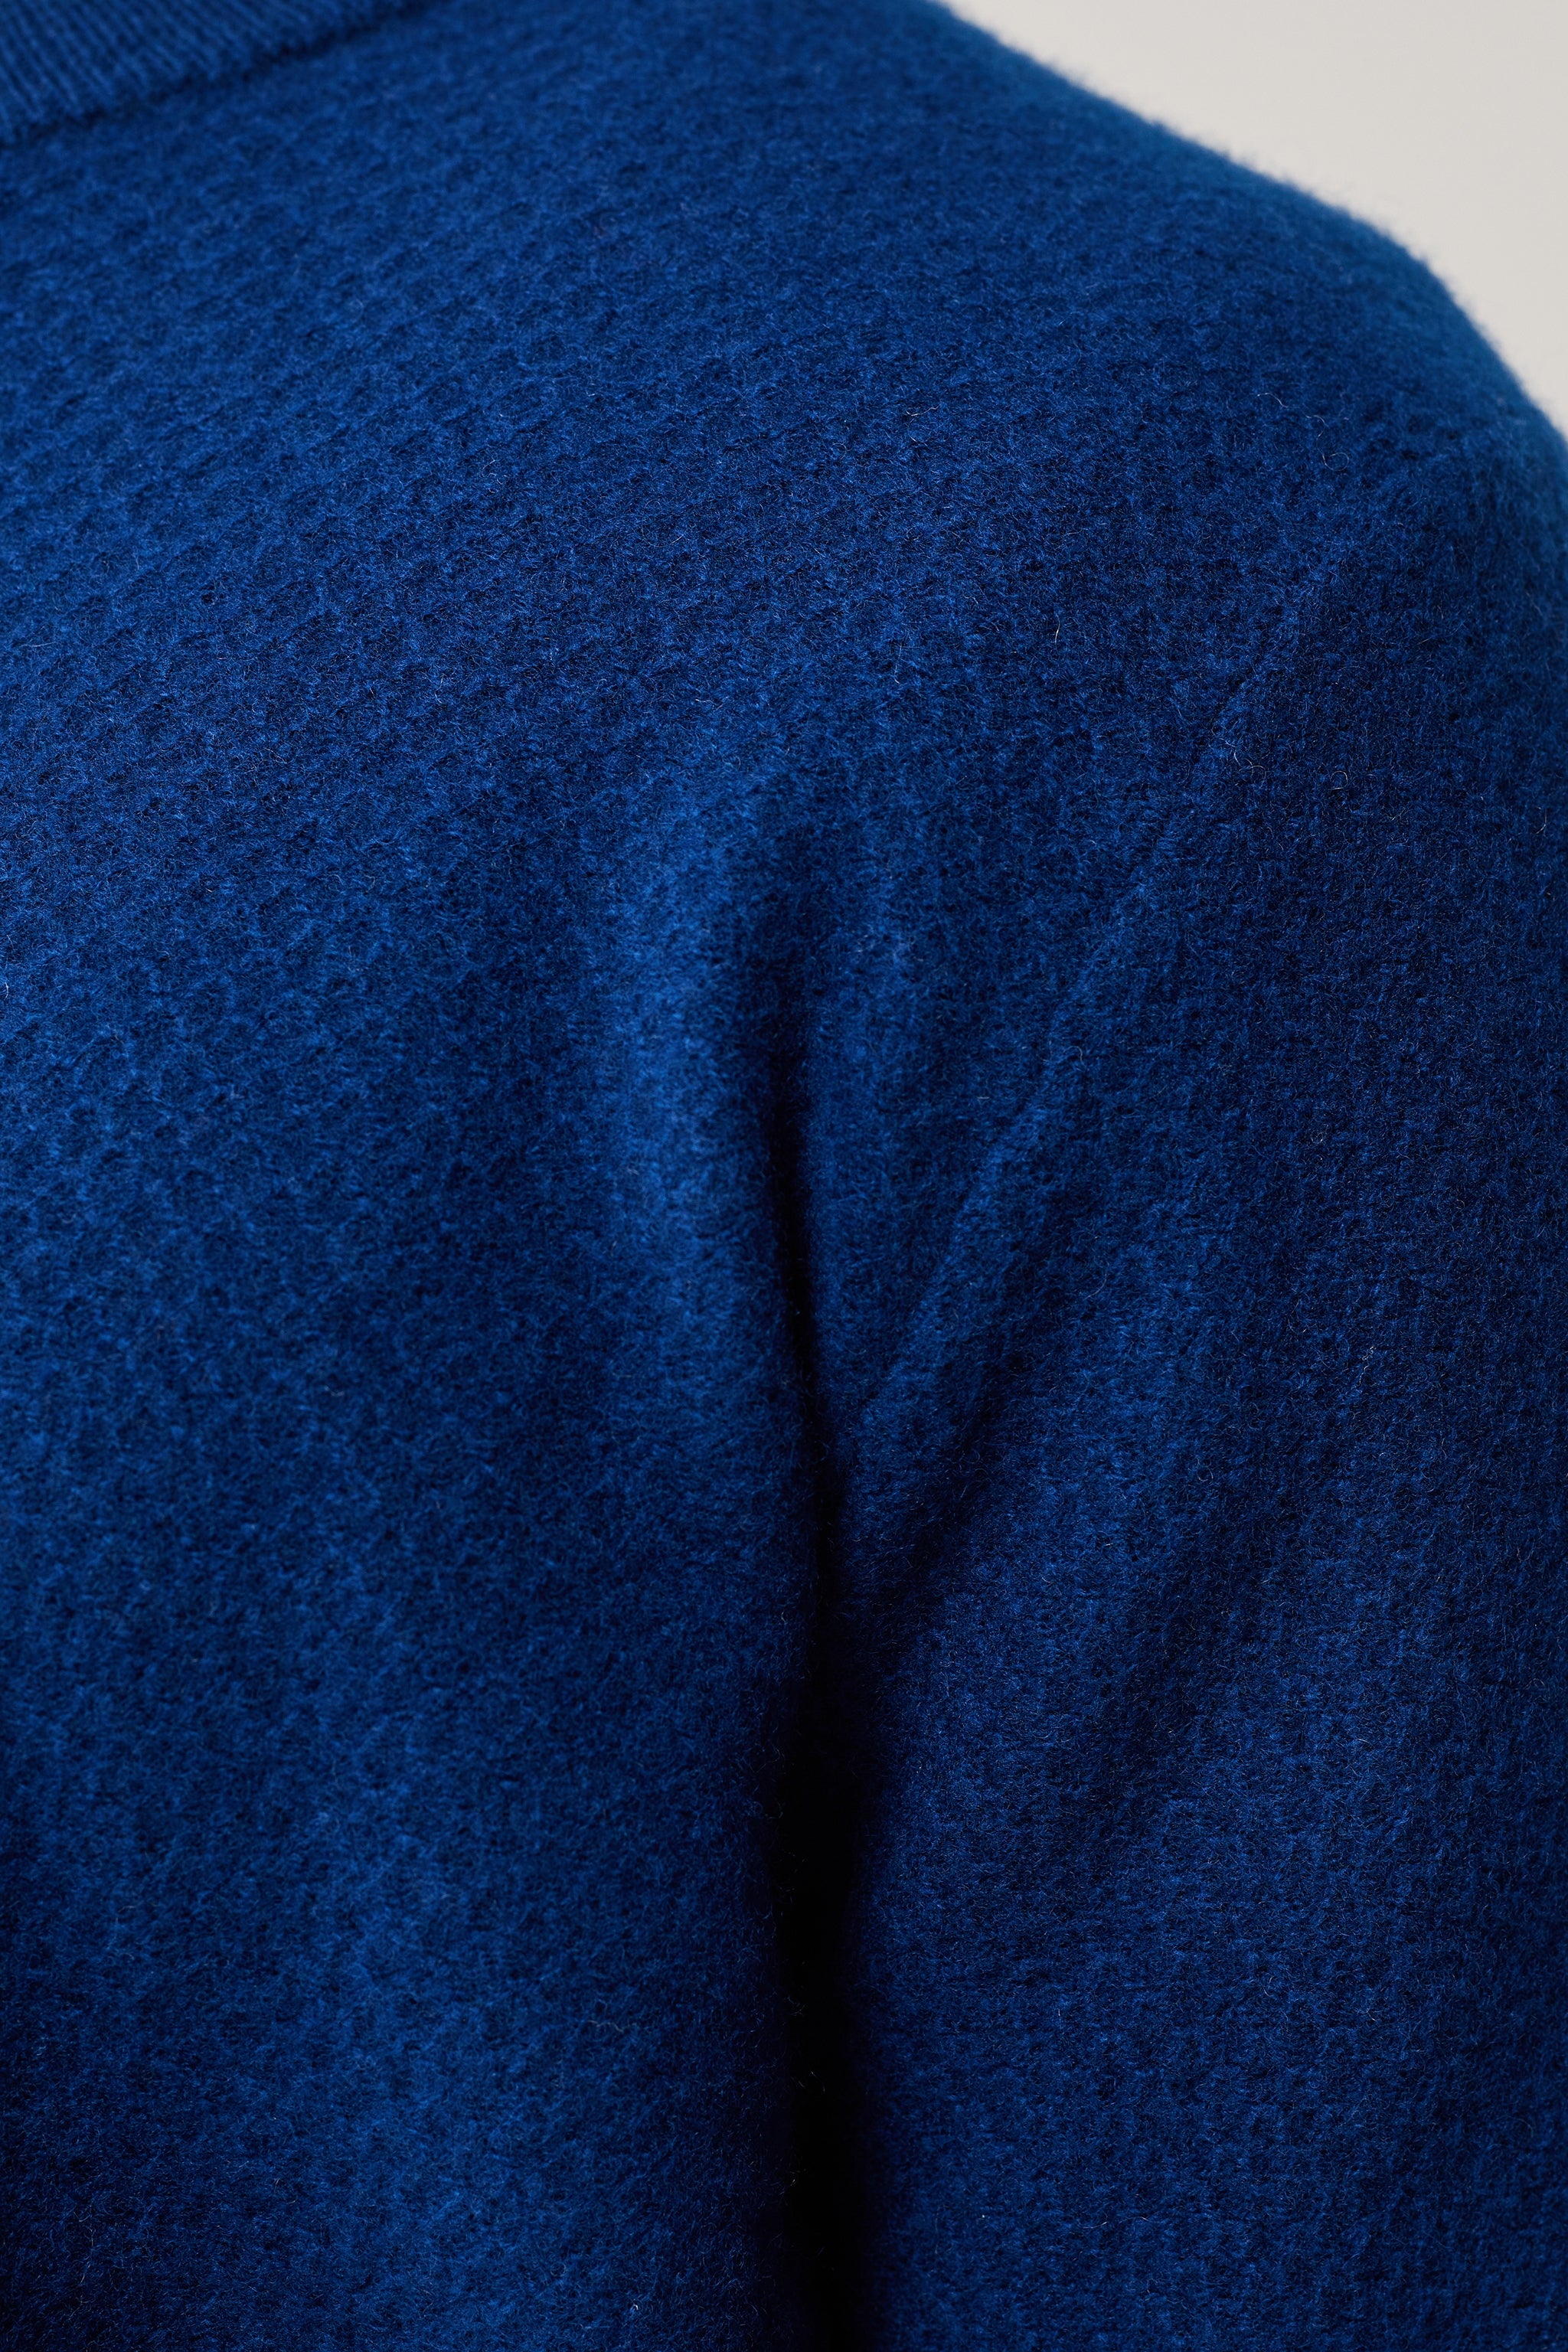 a close up of a person wearing a blue sweater